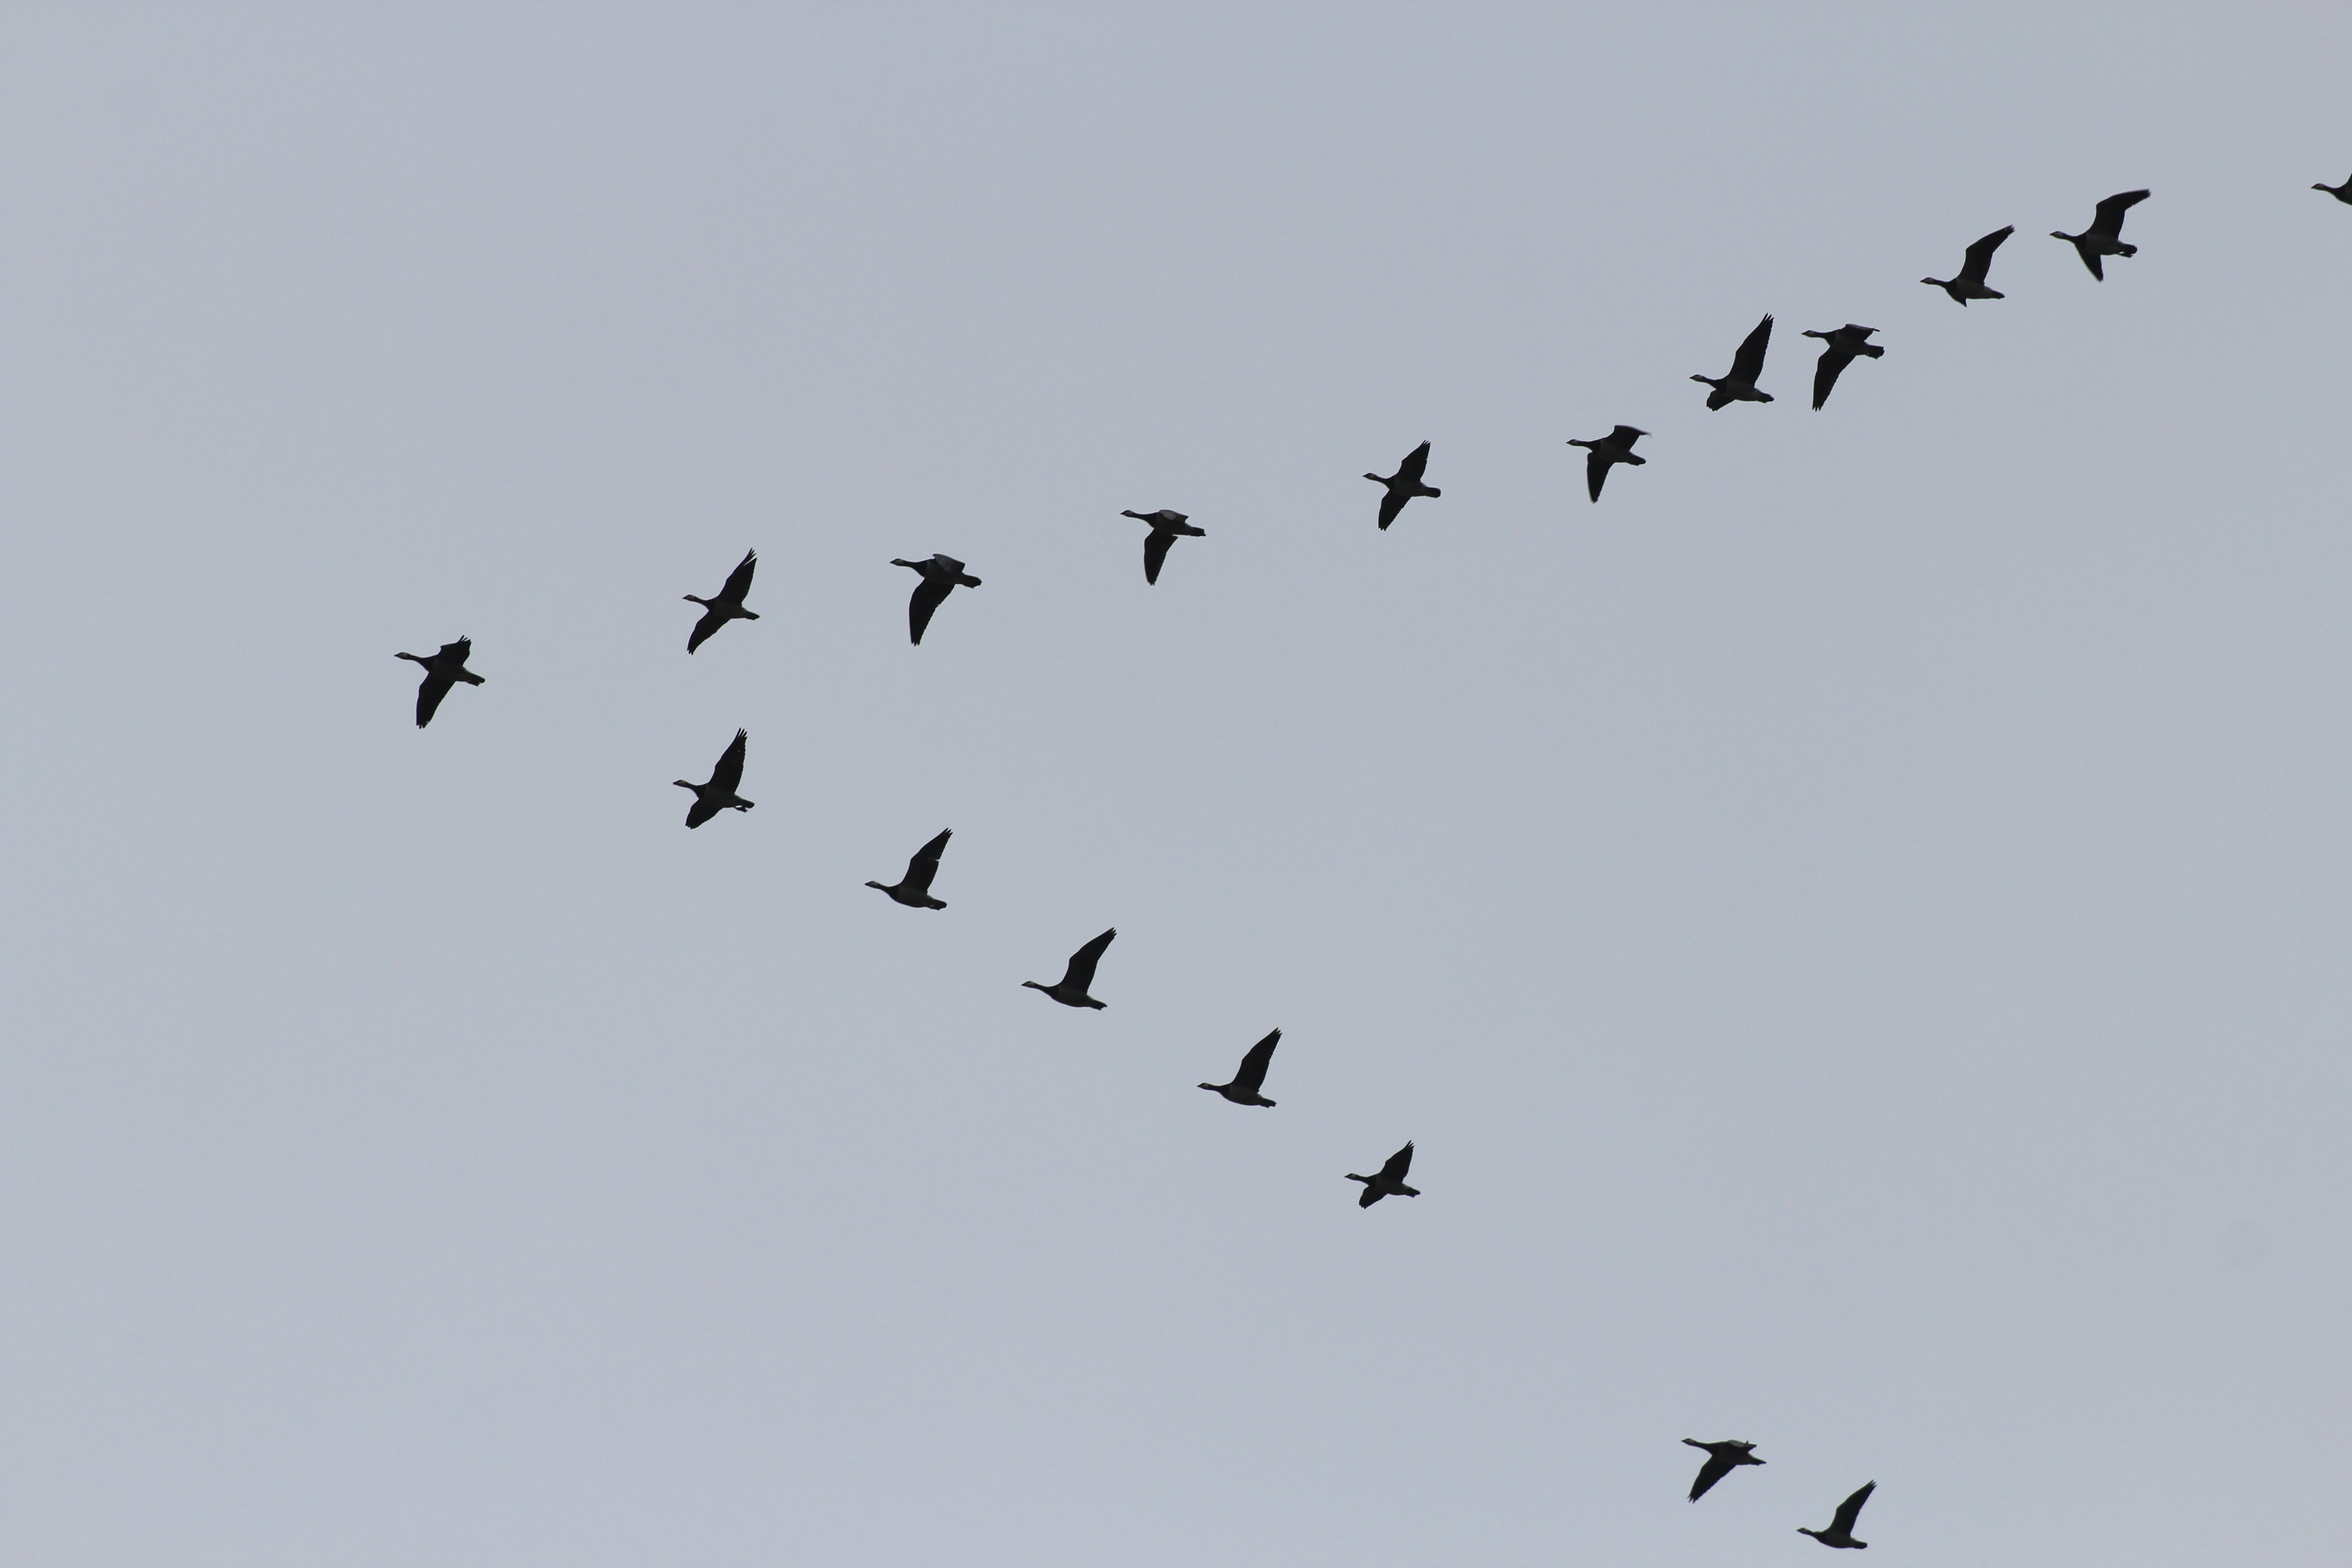 bird flying on air forming V, geese, migratory birds, swarm, formation